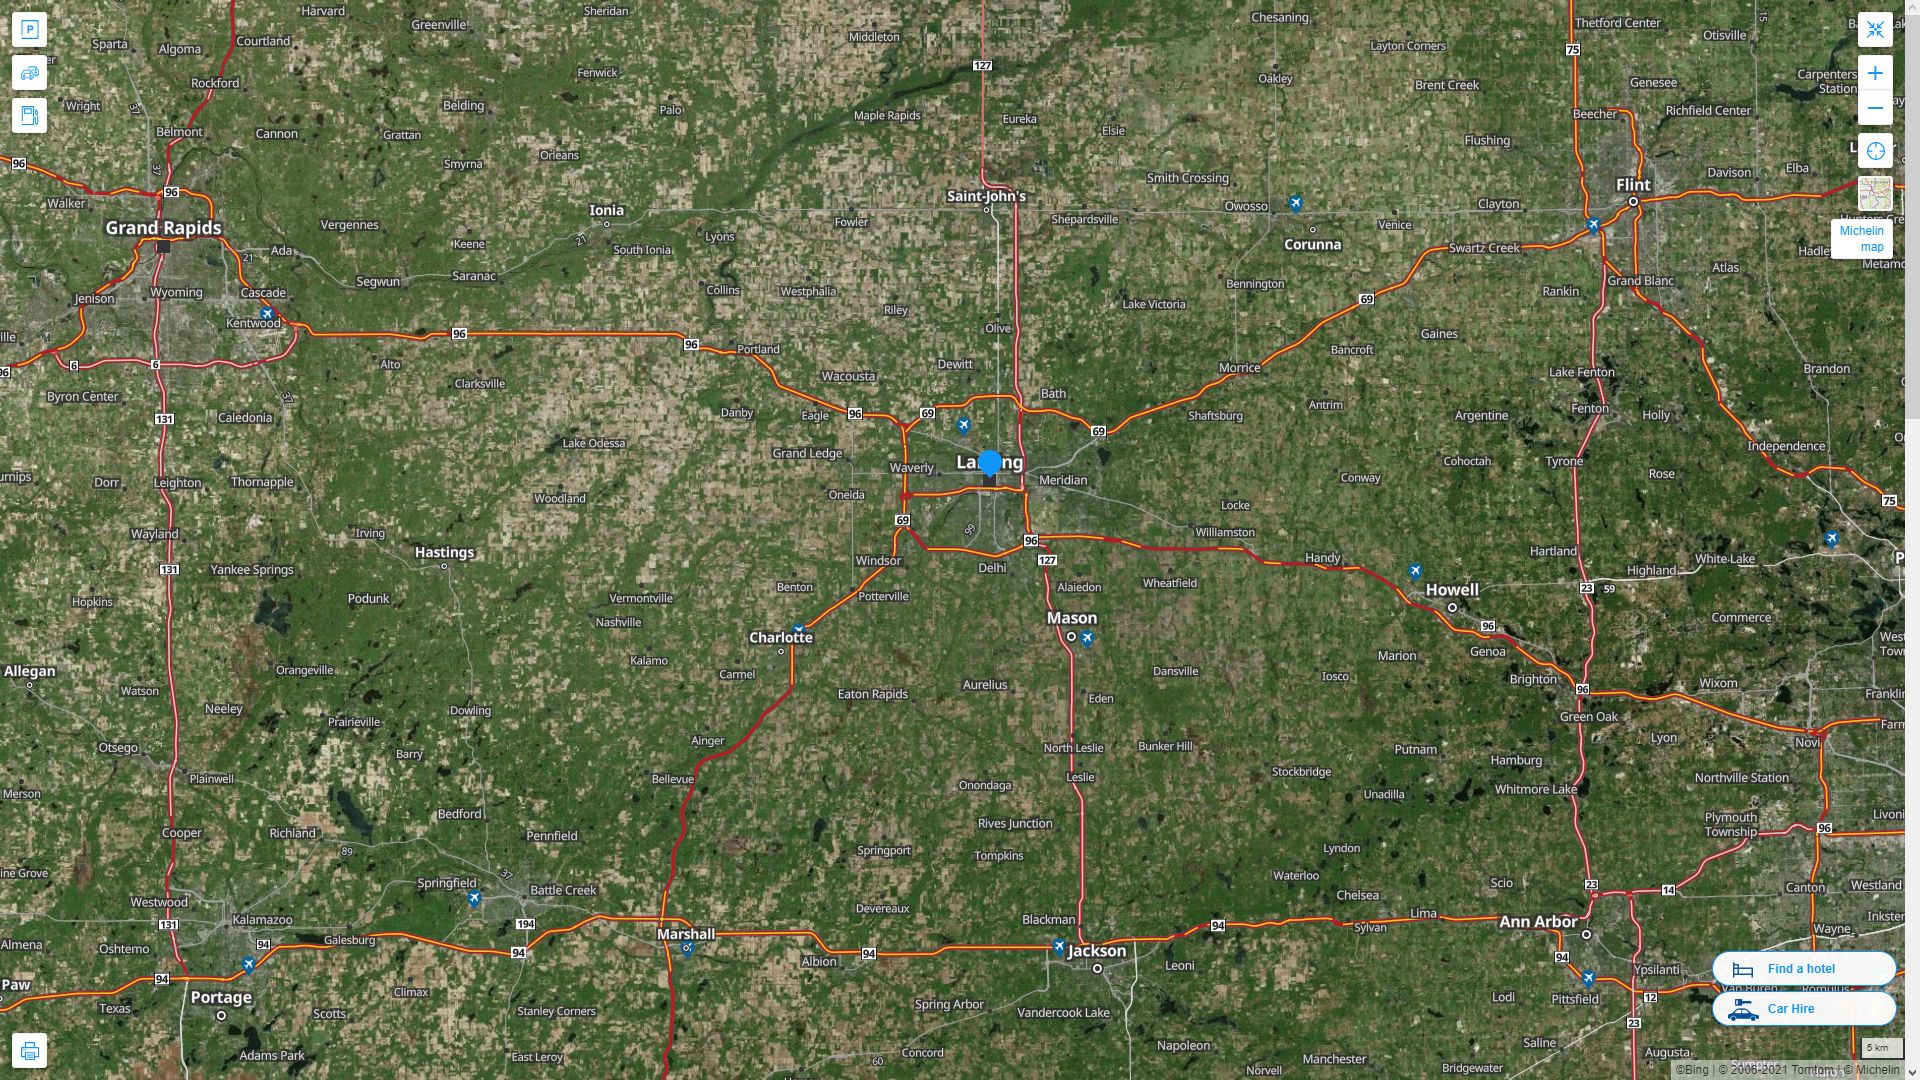 Lansing Michigan Highway and Road Map with Satellite View